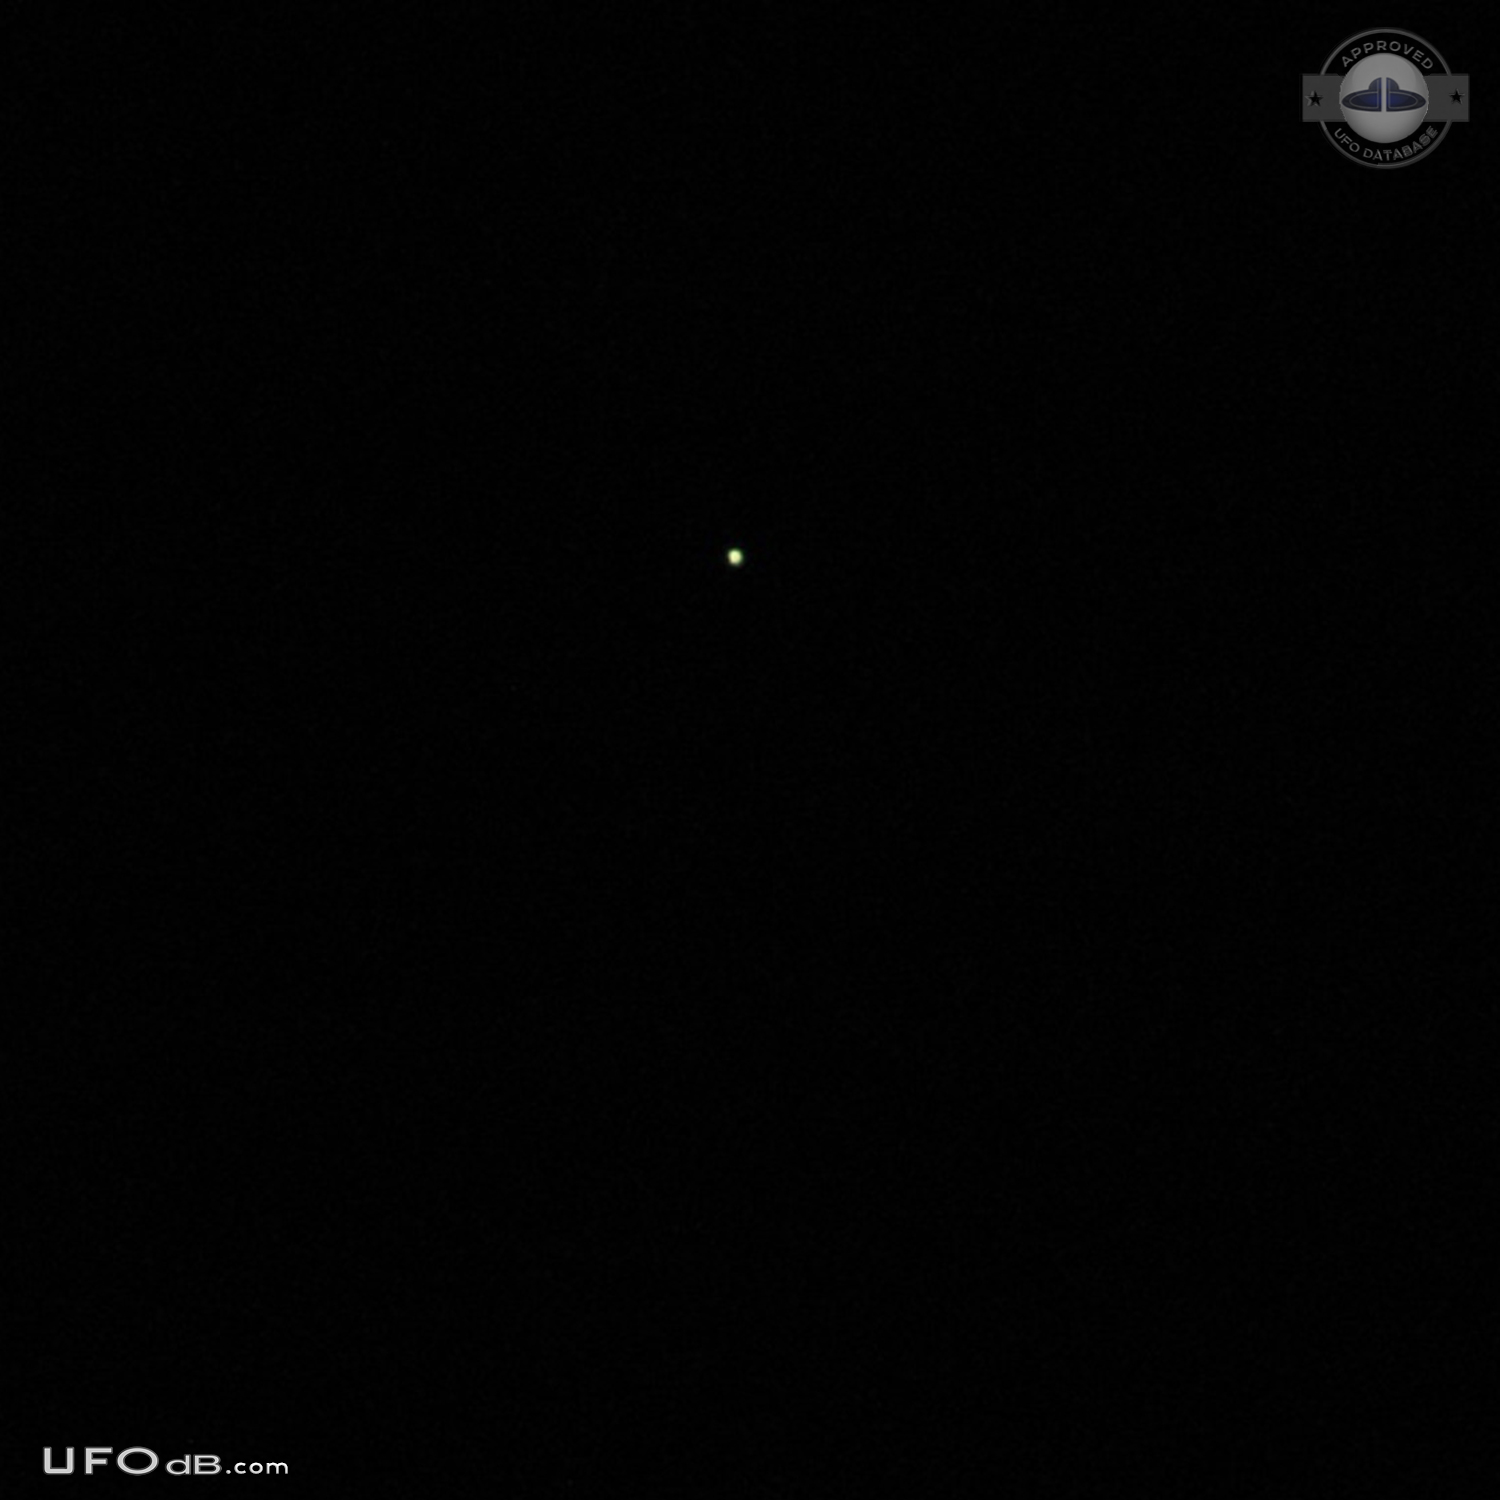 Very bright star UFO over Port Moresby, Papua New Guinea January 2015 UFO Picture #594-1